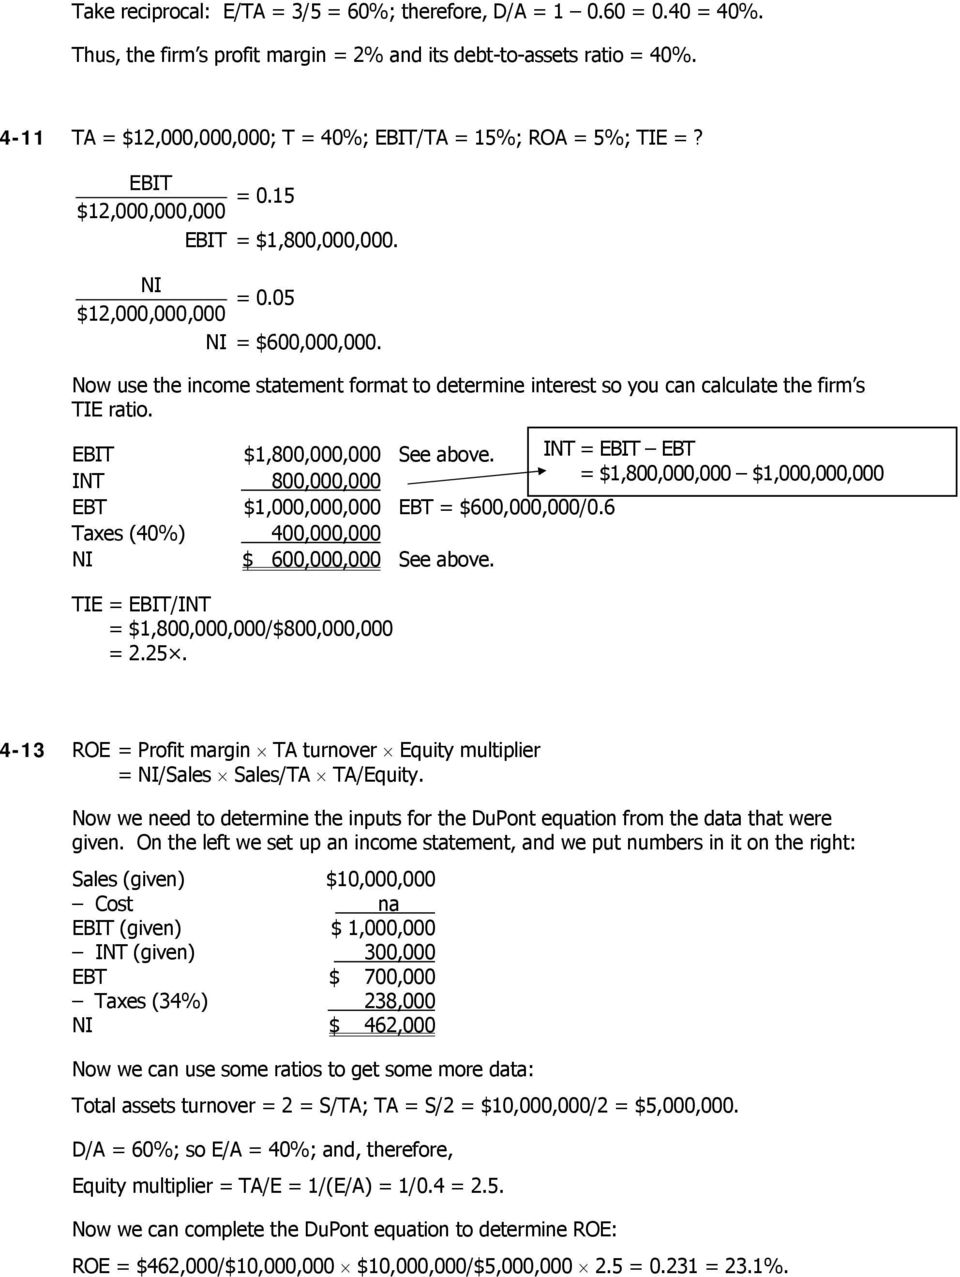 Now use the income statement format to determine interest so you can calculate the firm s TIE ratio. EBIT $1,800,000,000 See above.